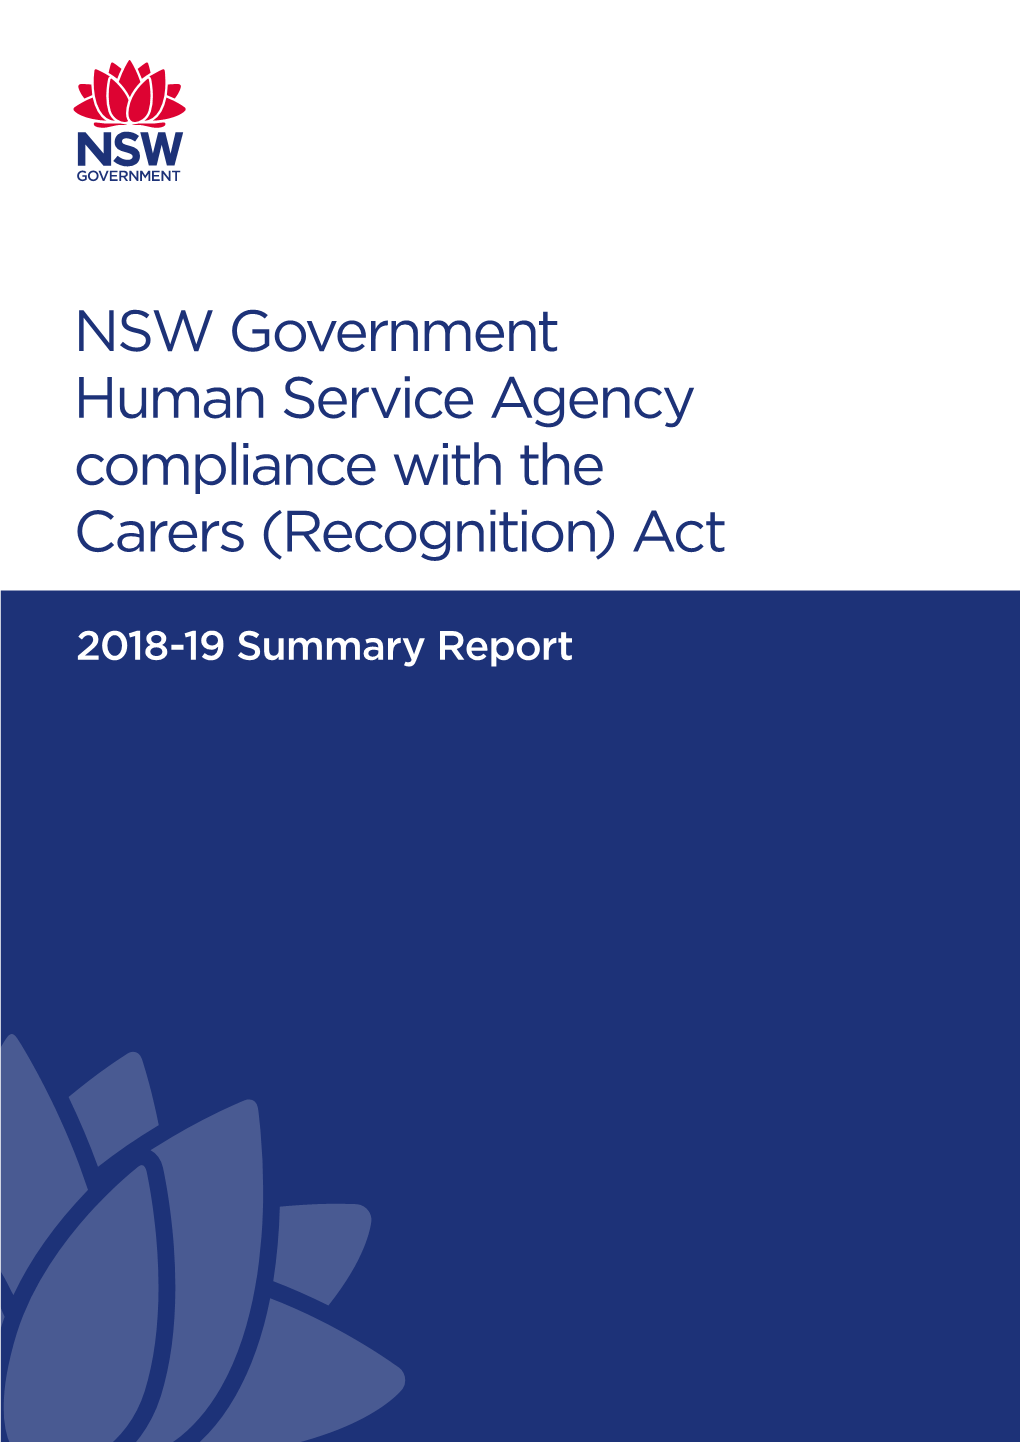 NSW Government Human Service Agency Compliance with the Carers (Recognition) Act